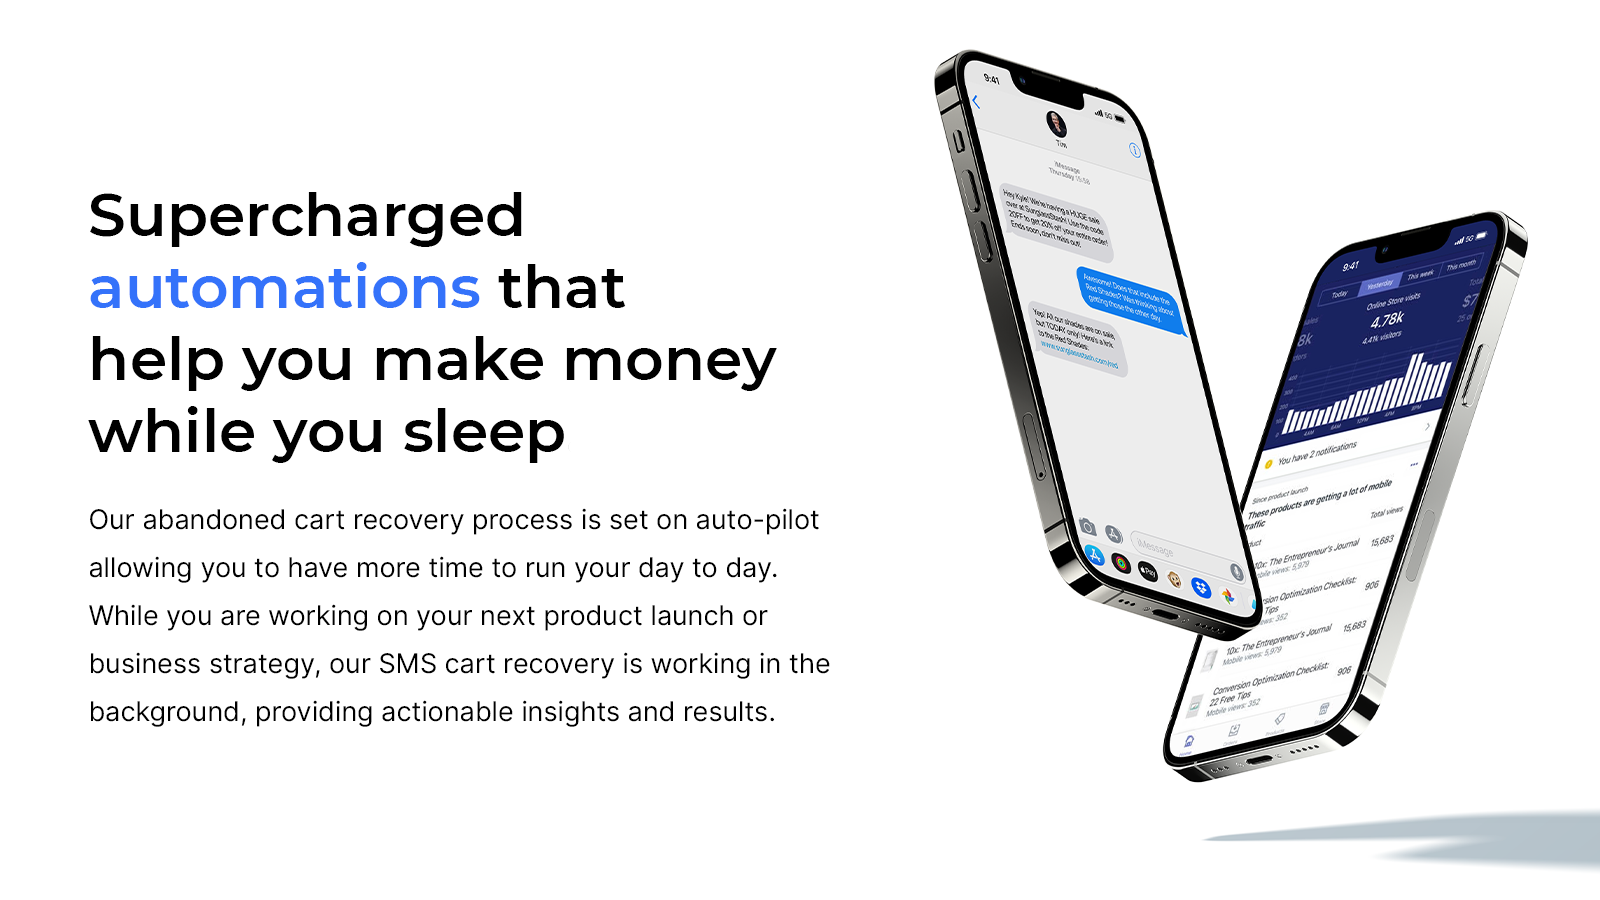 SMS, MMS, SMS Marketing, Abandoned Cart, SMS Cart Recovery